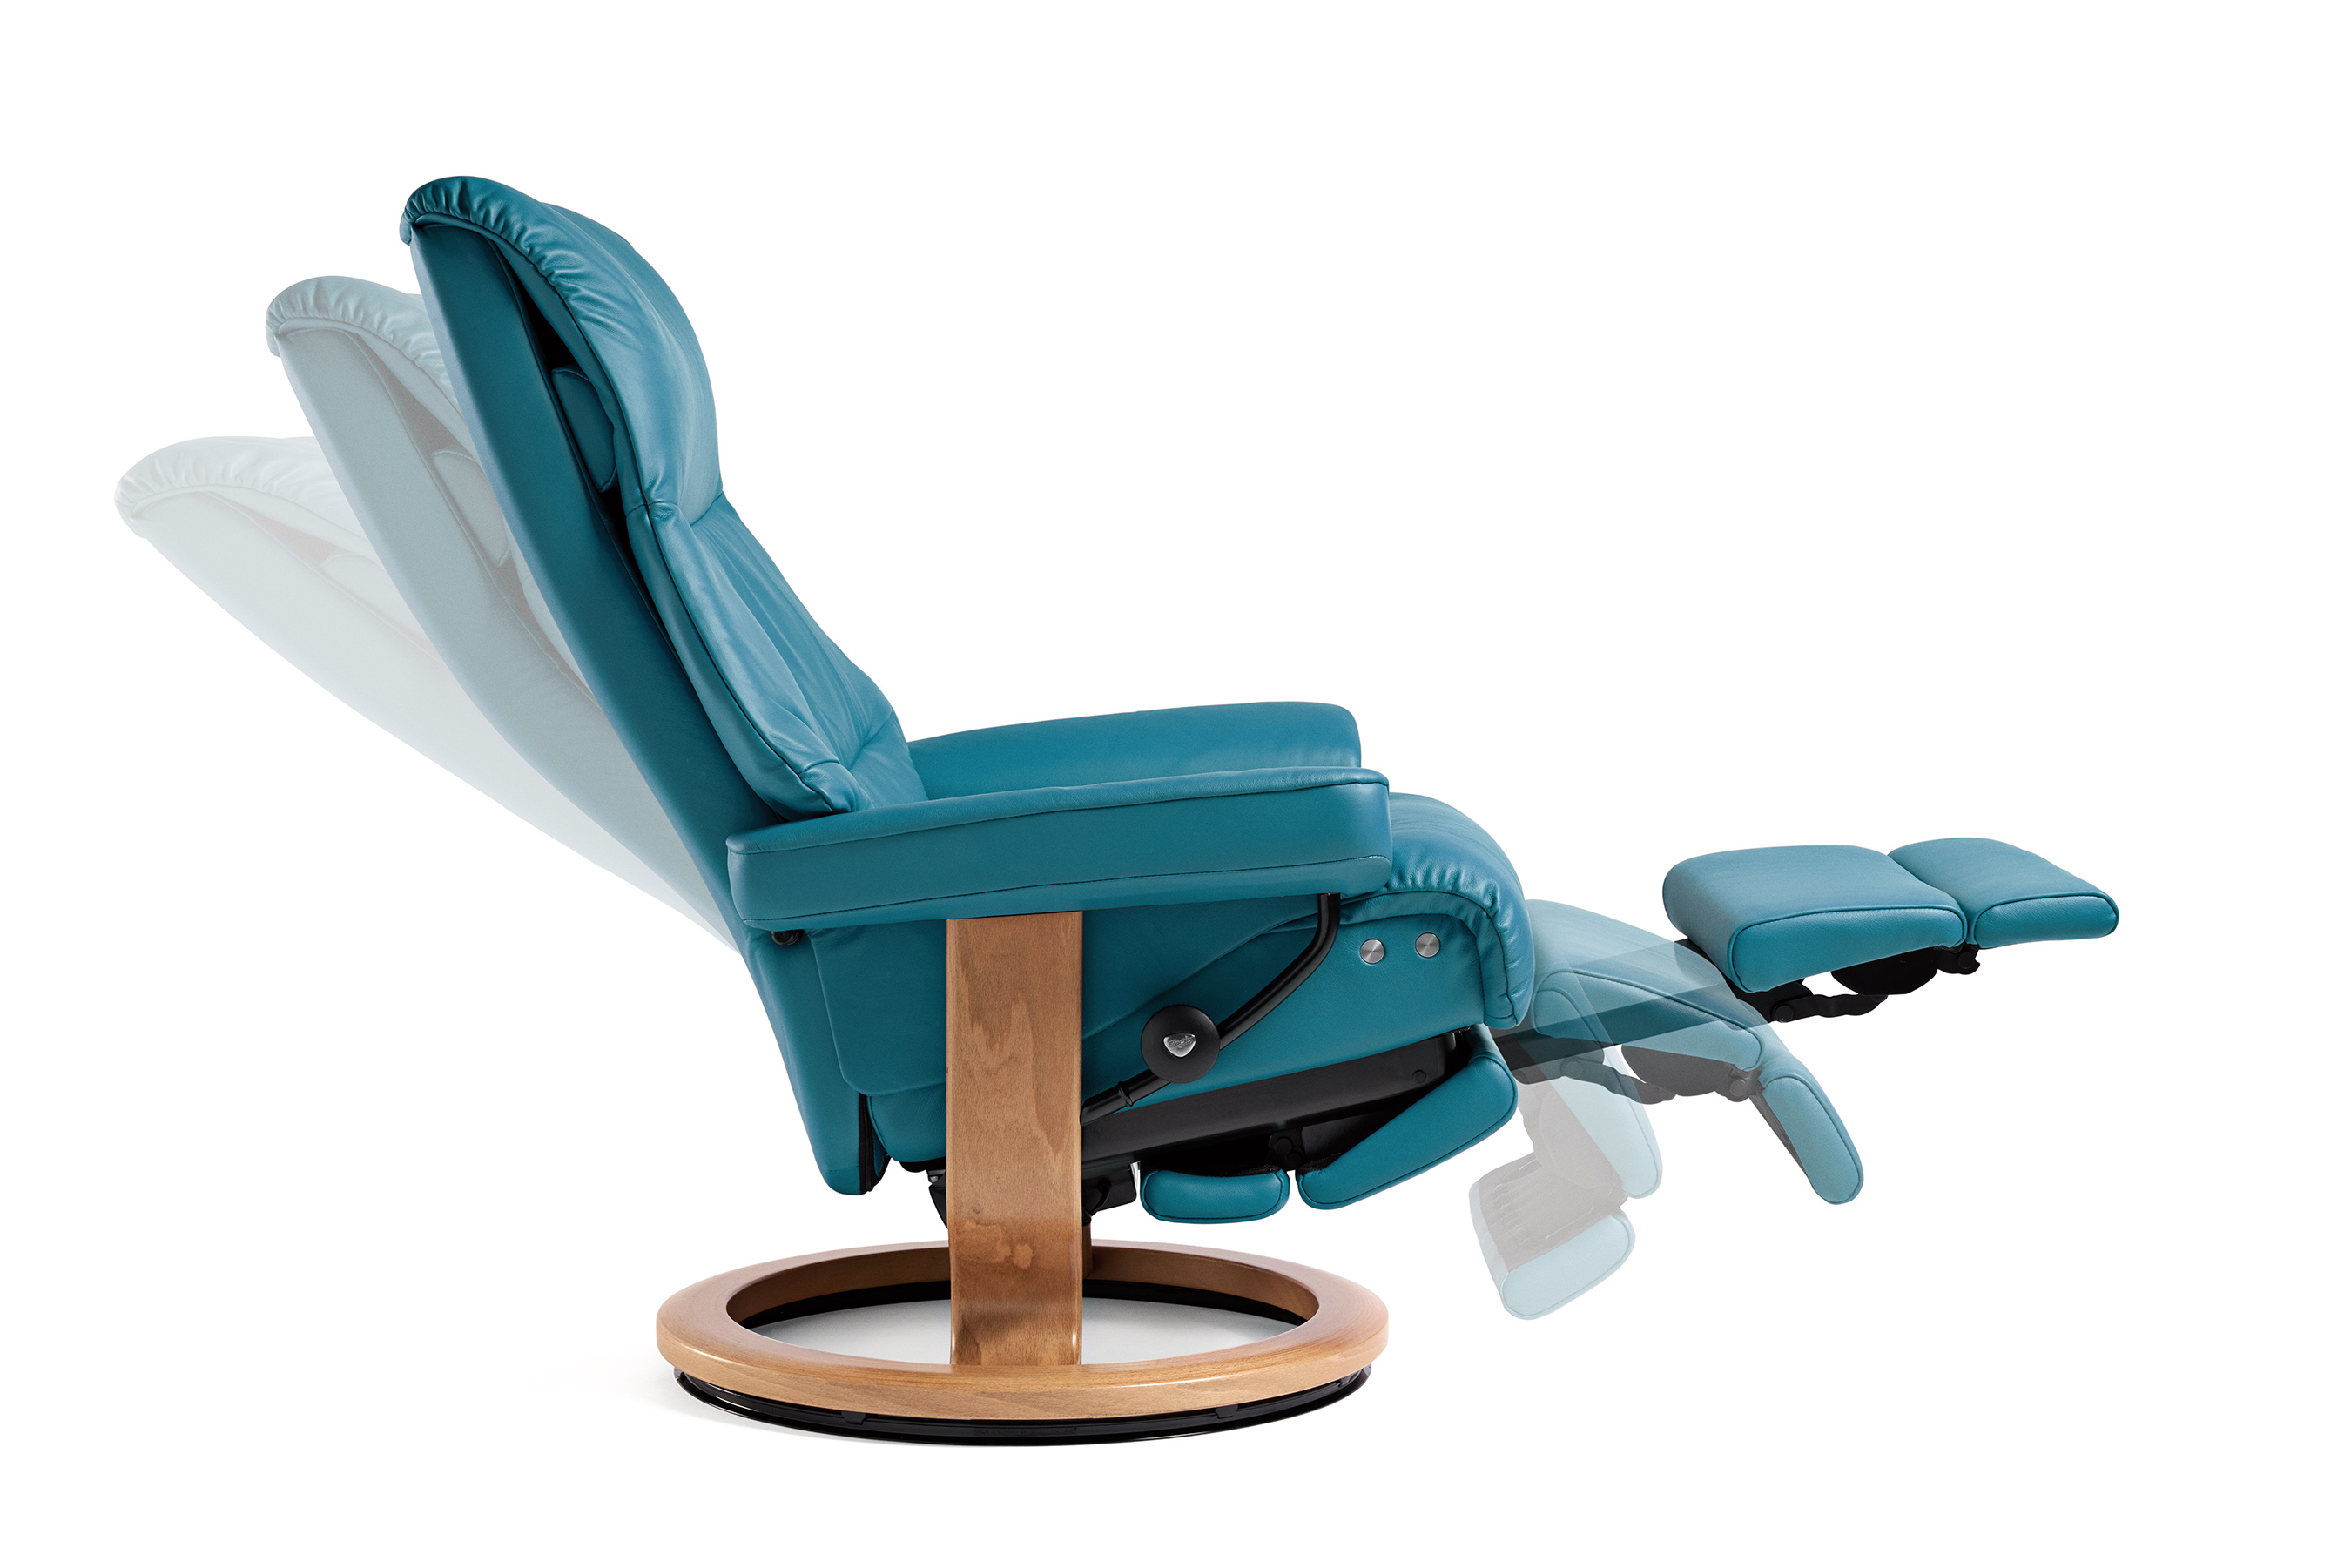 The Stressless LegComfort™-system releases a hidden footrest with a gentle push to provide optimal, adjustable leg support. Shown here with the Classic Recliner in Paloma Crystal Blue leather.